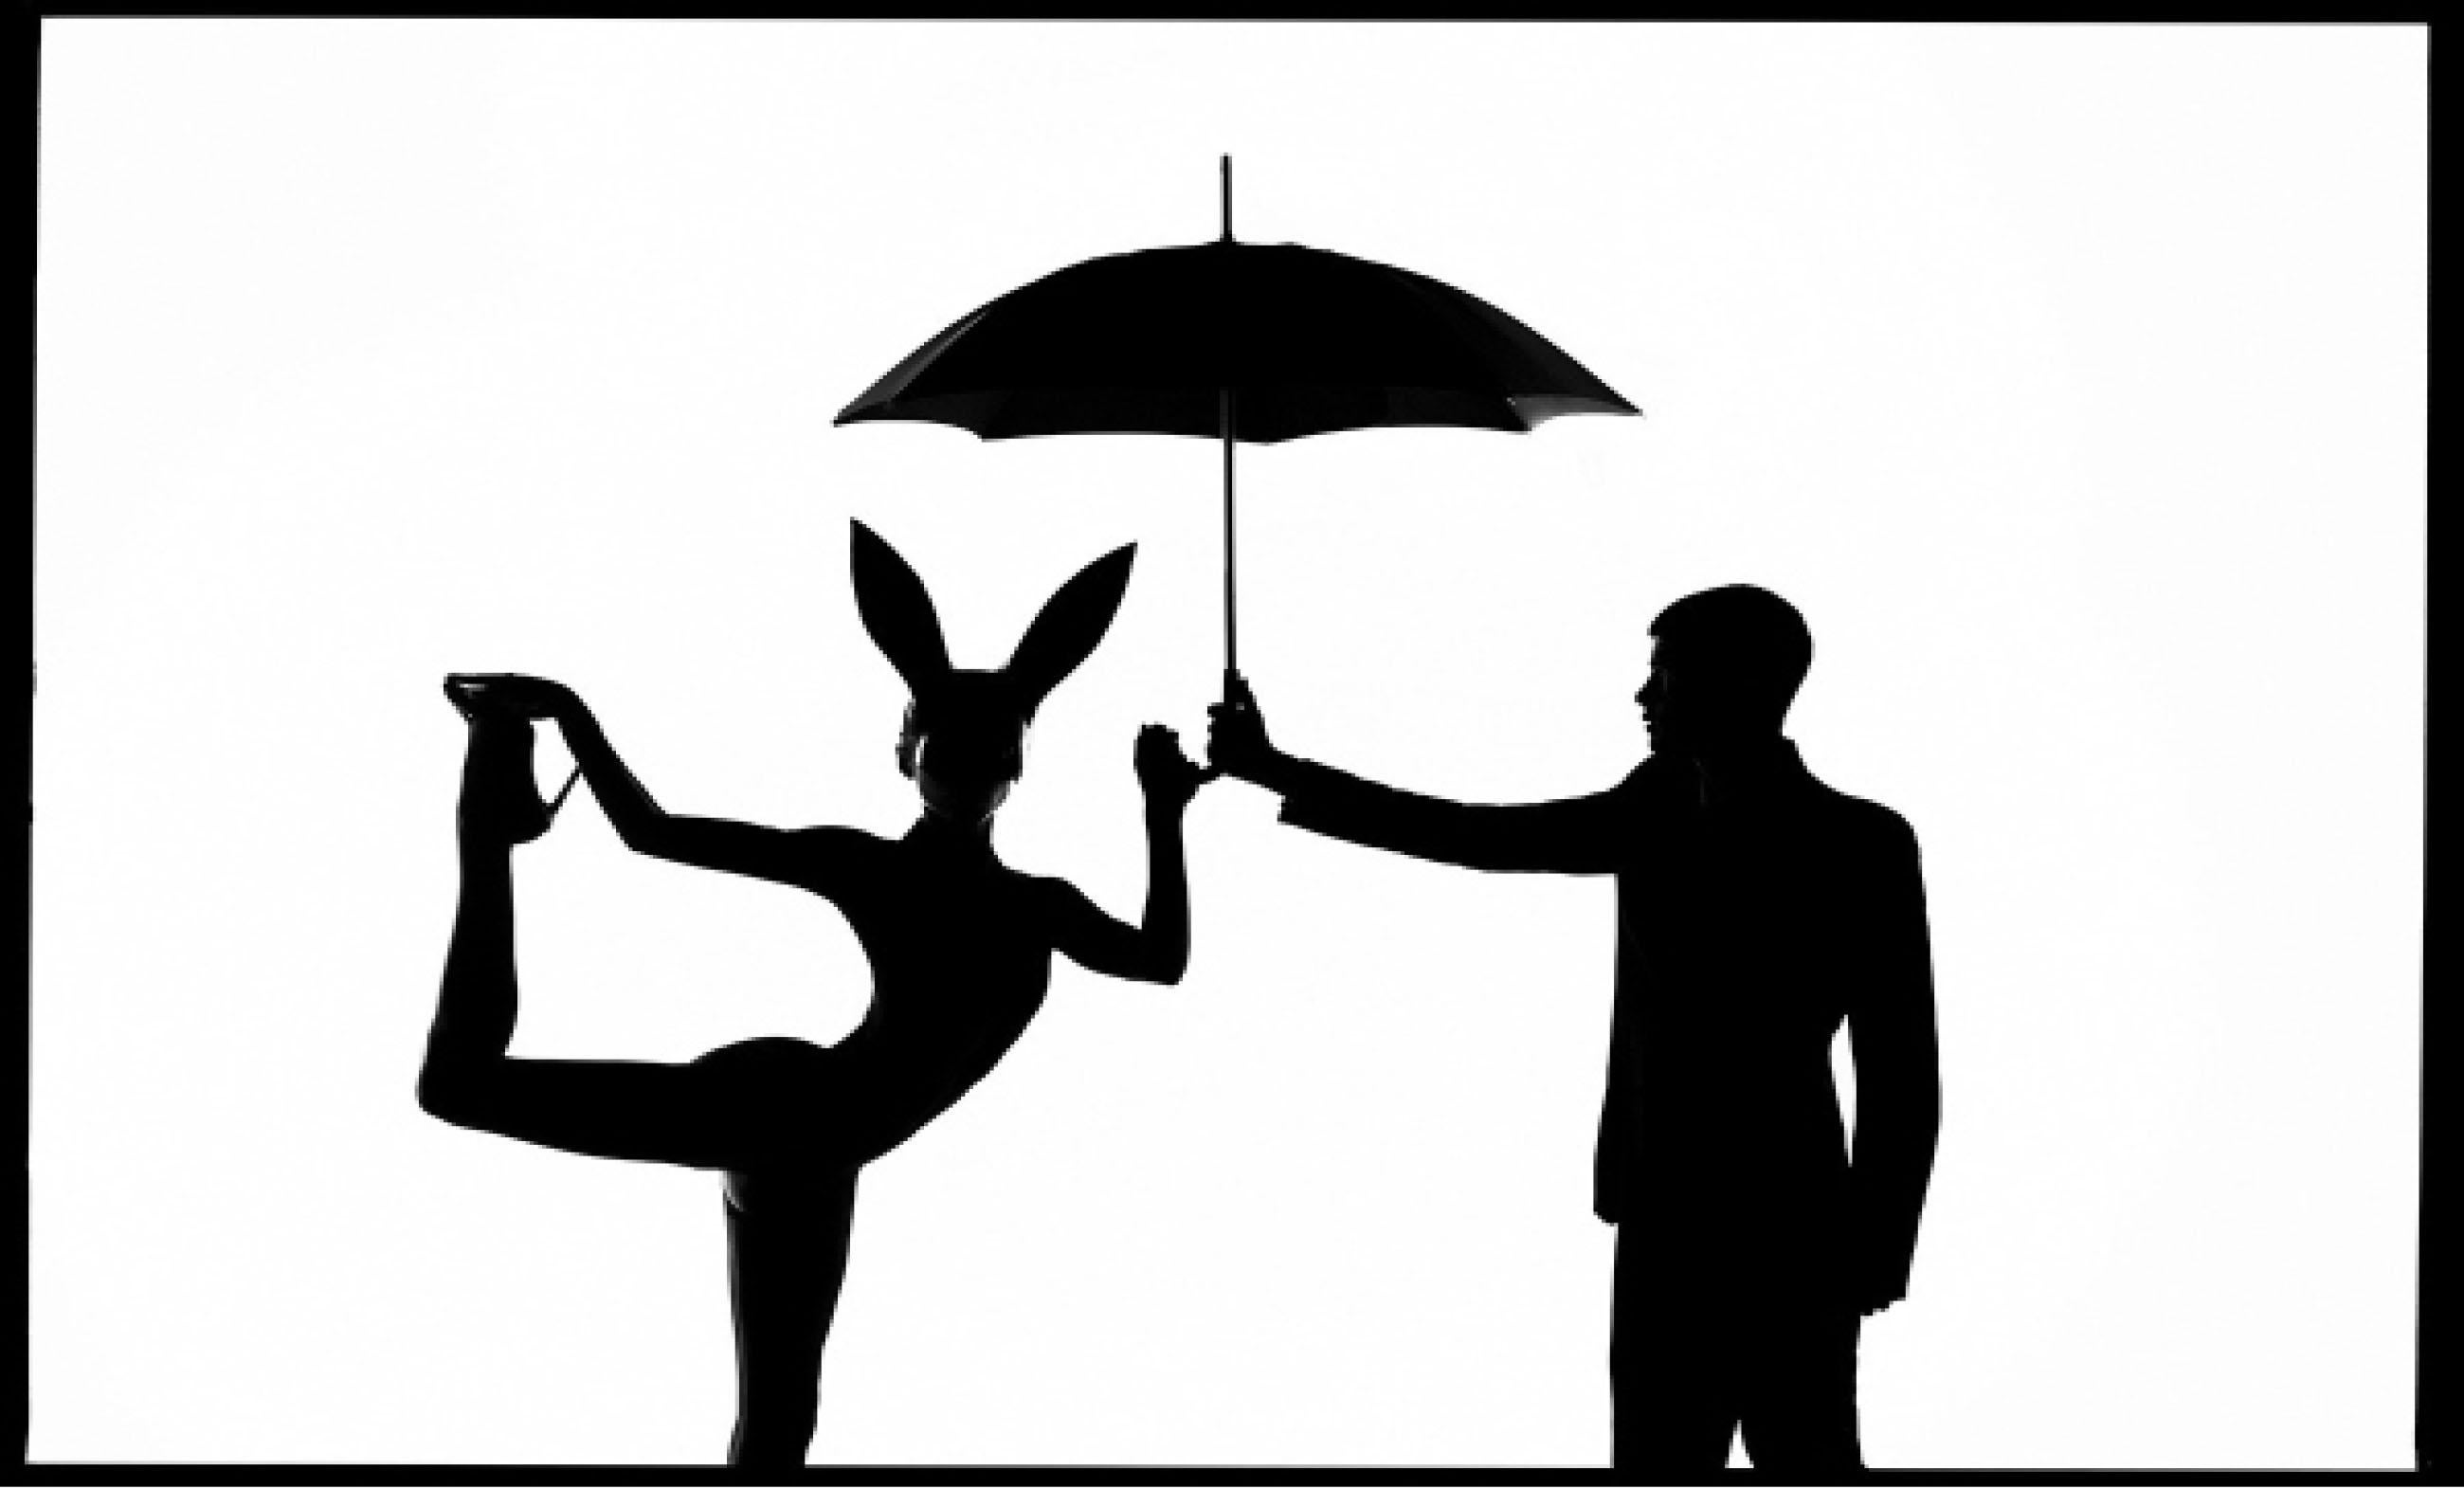 Tyler Shields - The Bunny and the Man, Photography 2020, Printed After